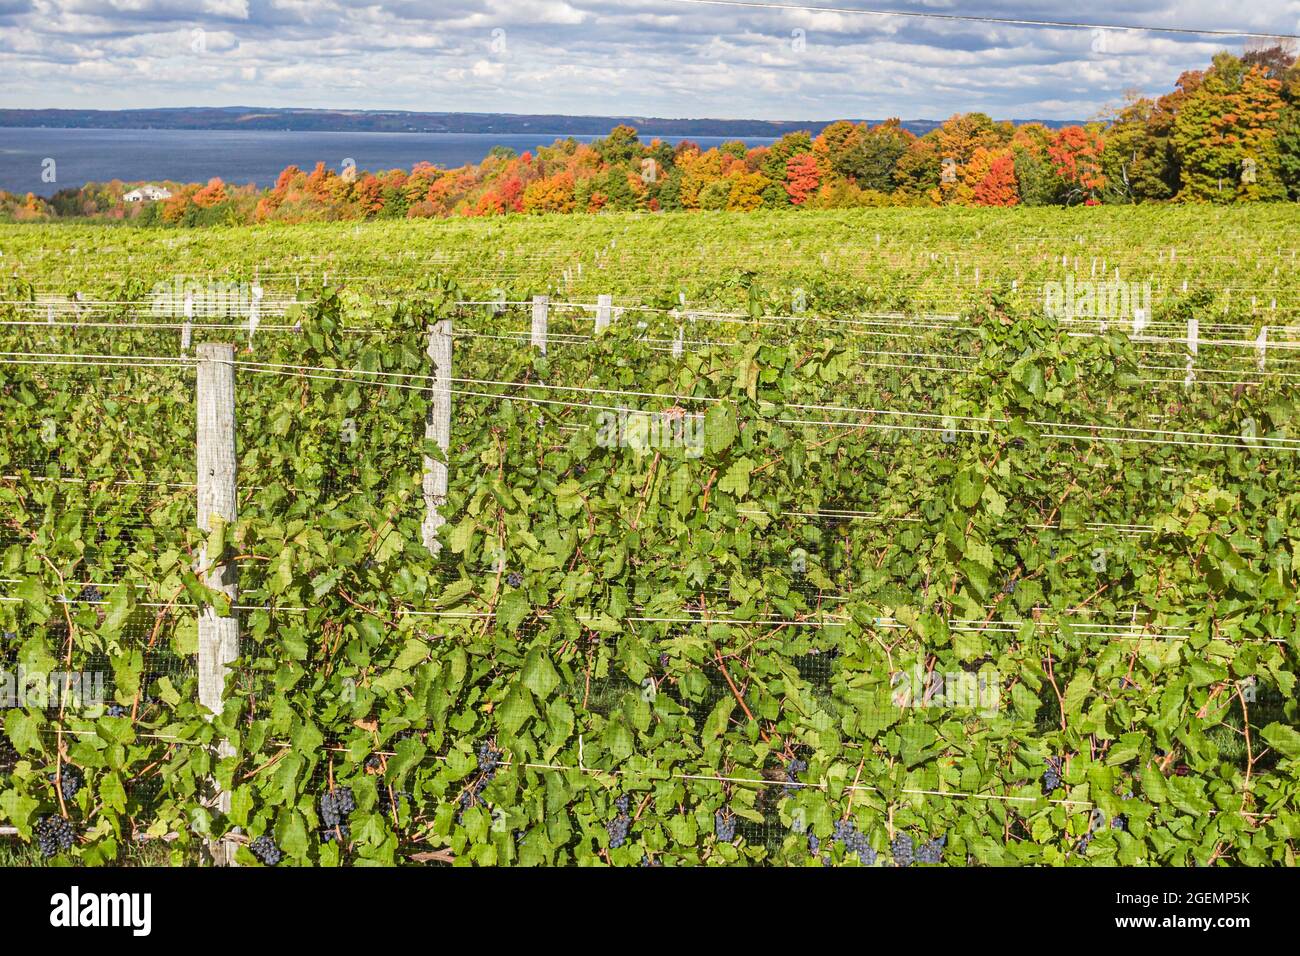 Michigan Old Mission Peninsula Traverse City vineyard grapes,rural country countryside autumn fall West Arm Grand Traverse Bay, Stock Photo